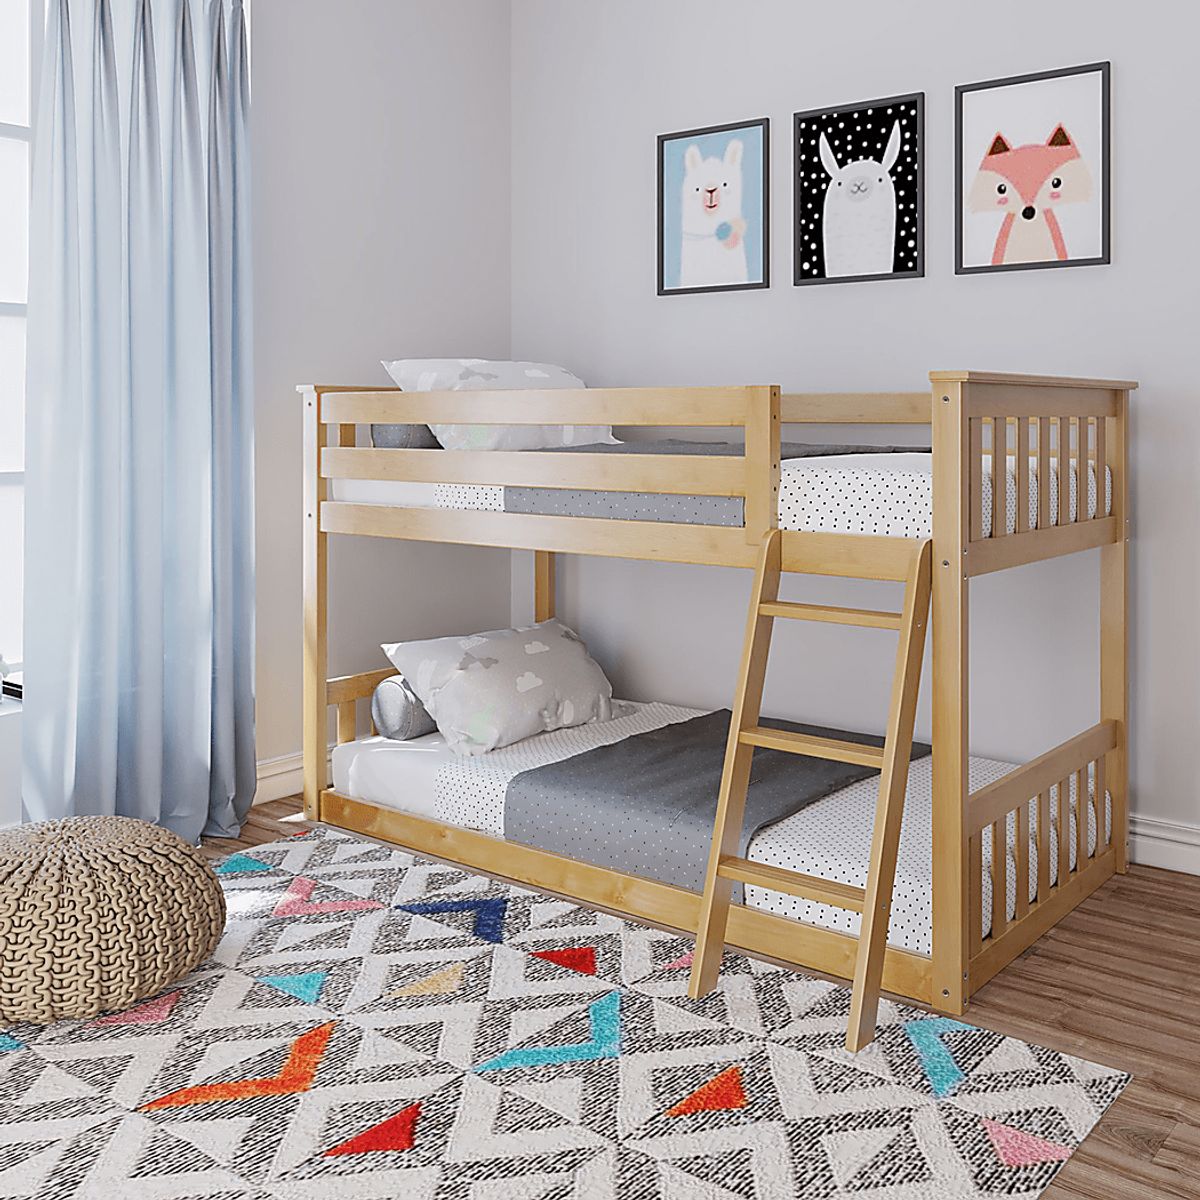 Imonie Beige Colors,Light Wood,White Twin/Twin Bunk Bed | Rooms to Go